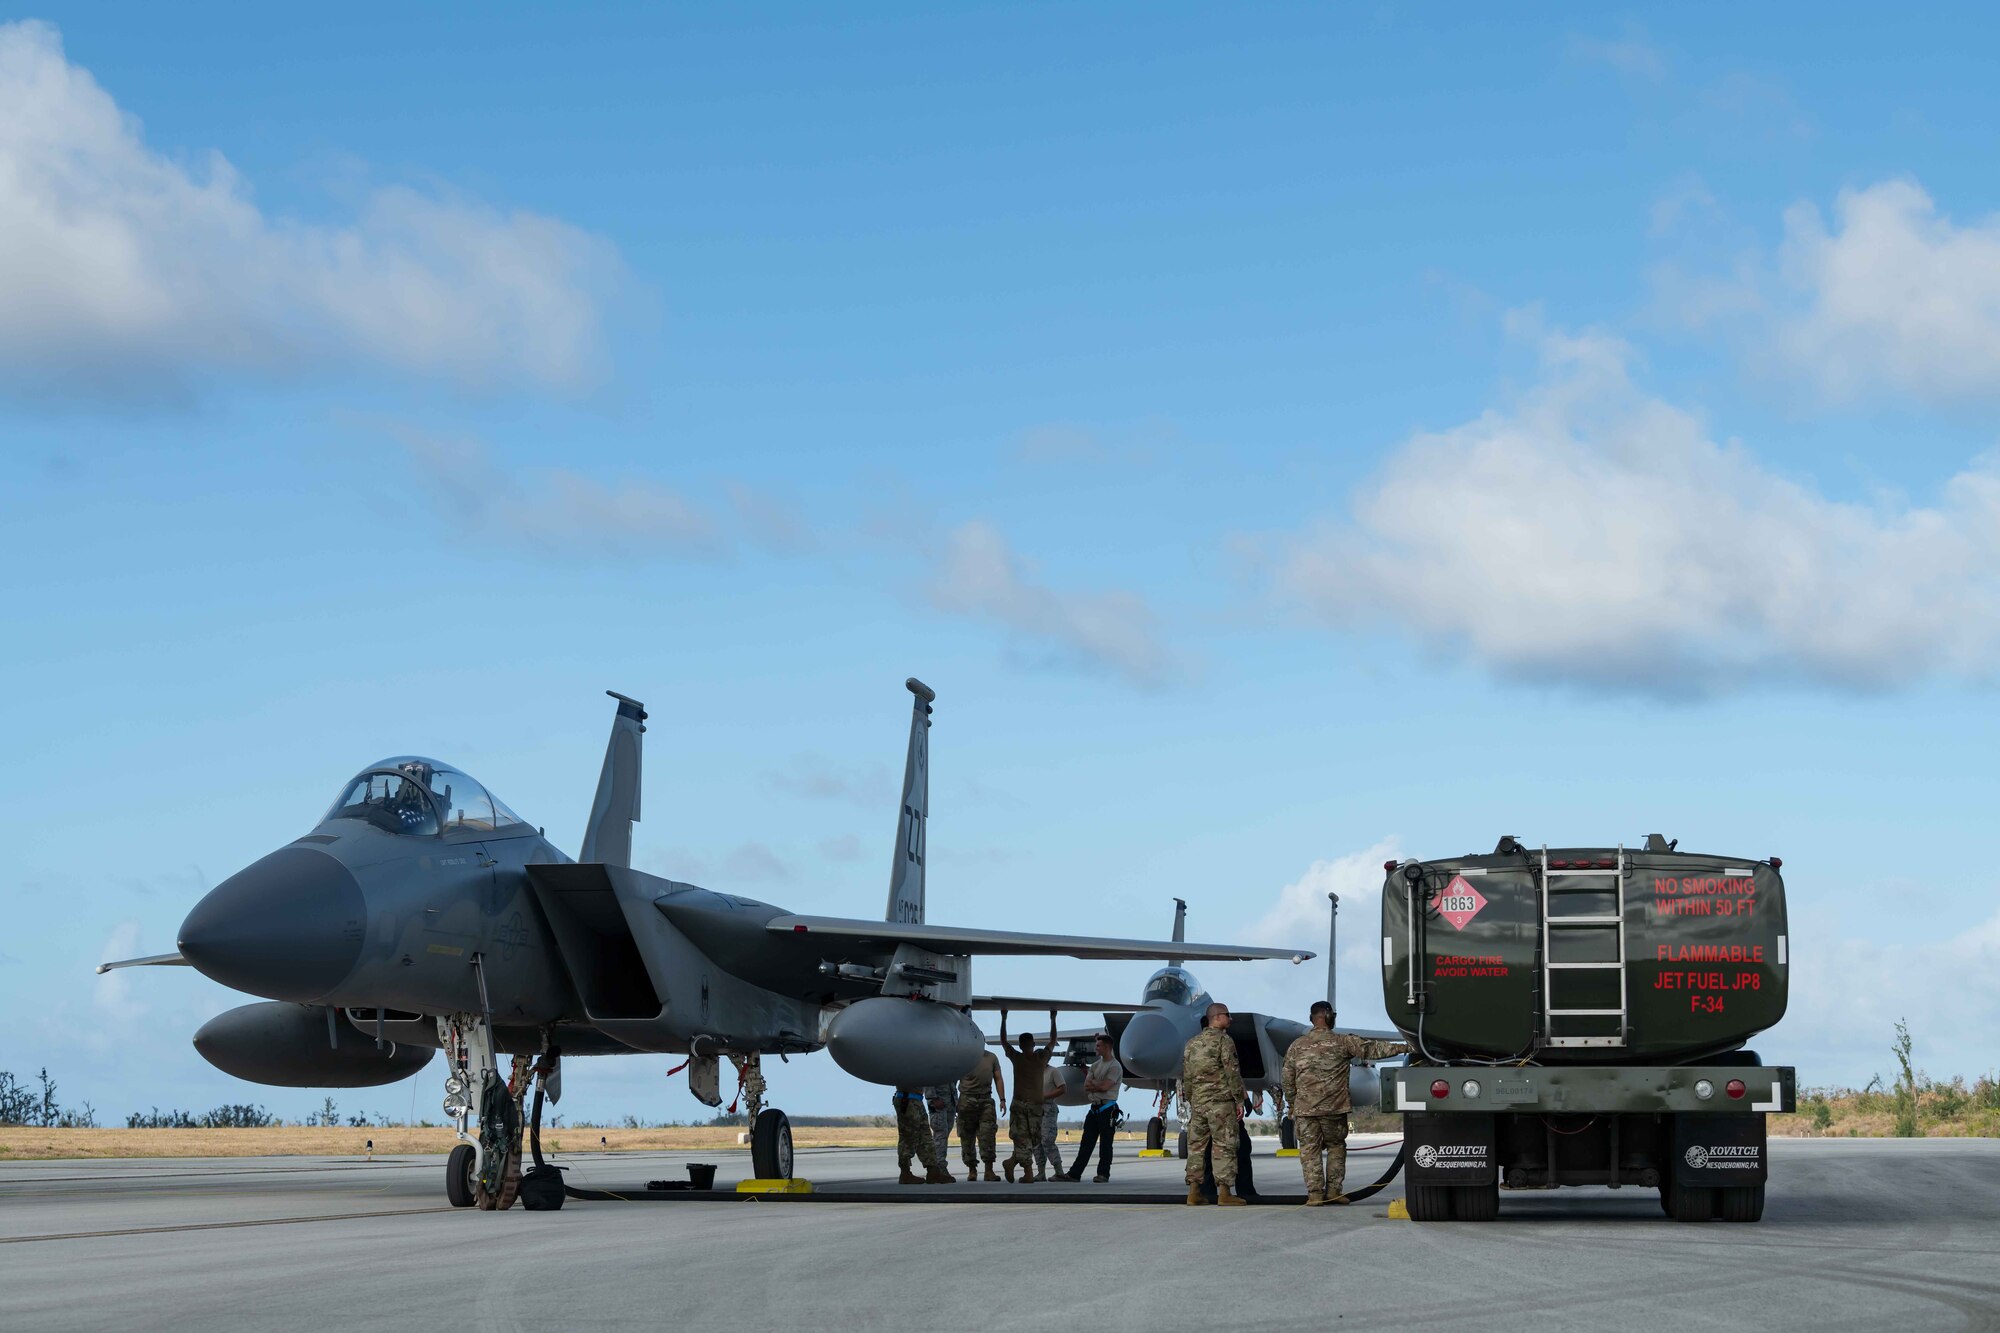 An F-15C Eagle from the 44th Fighter Squadron, Kadena Air Base, Japan, gets refueled at Tinian International Airport, Tinian, during exercise Resilient Typhoon, April 23, 2019.  The aircraft dispersal exercise, based from Andersen Air Force Base, Guam, empowered Airmen at the tactical level to employ new approaches to operations in order to increase resiliency and readiness.  (U.S. Air Force photo by Airman 1st Class Matthew Seefeldt)